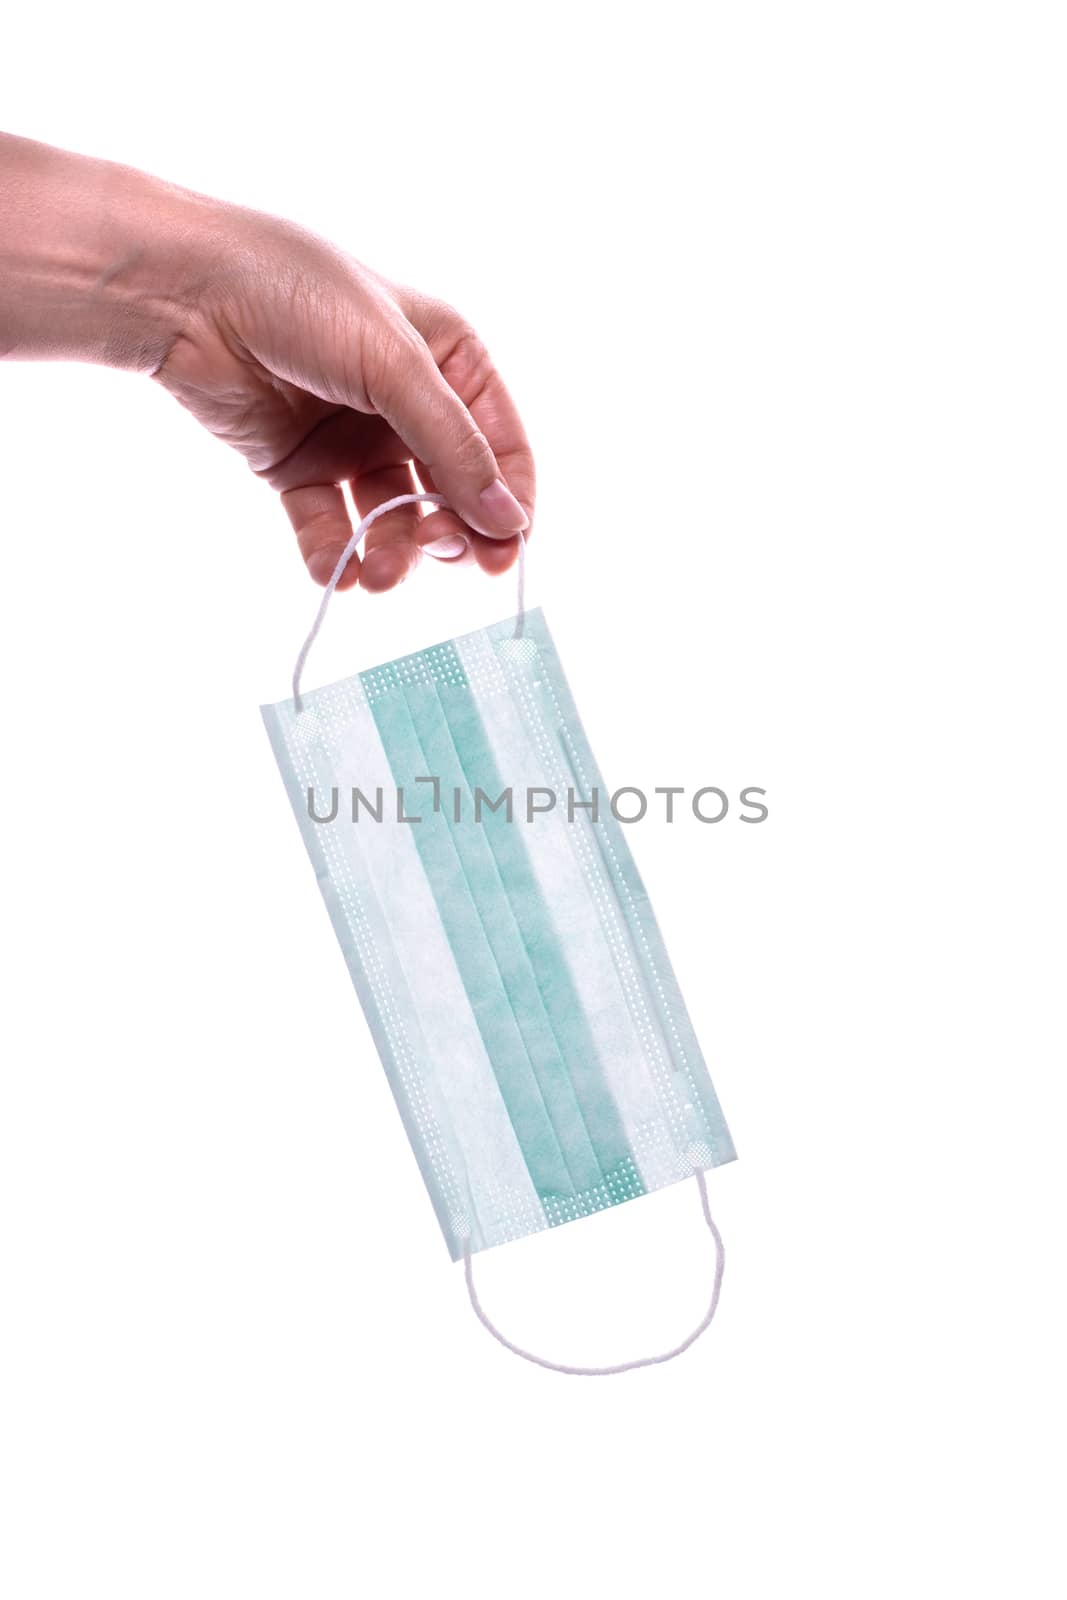 Woman hands holding a protective mask against flu and viruses. Isolated on white background.